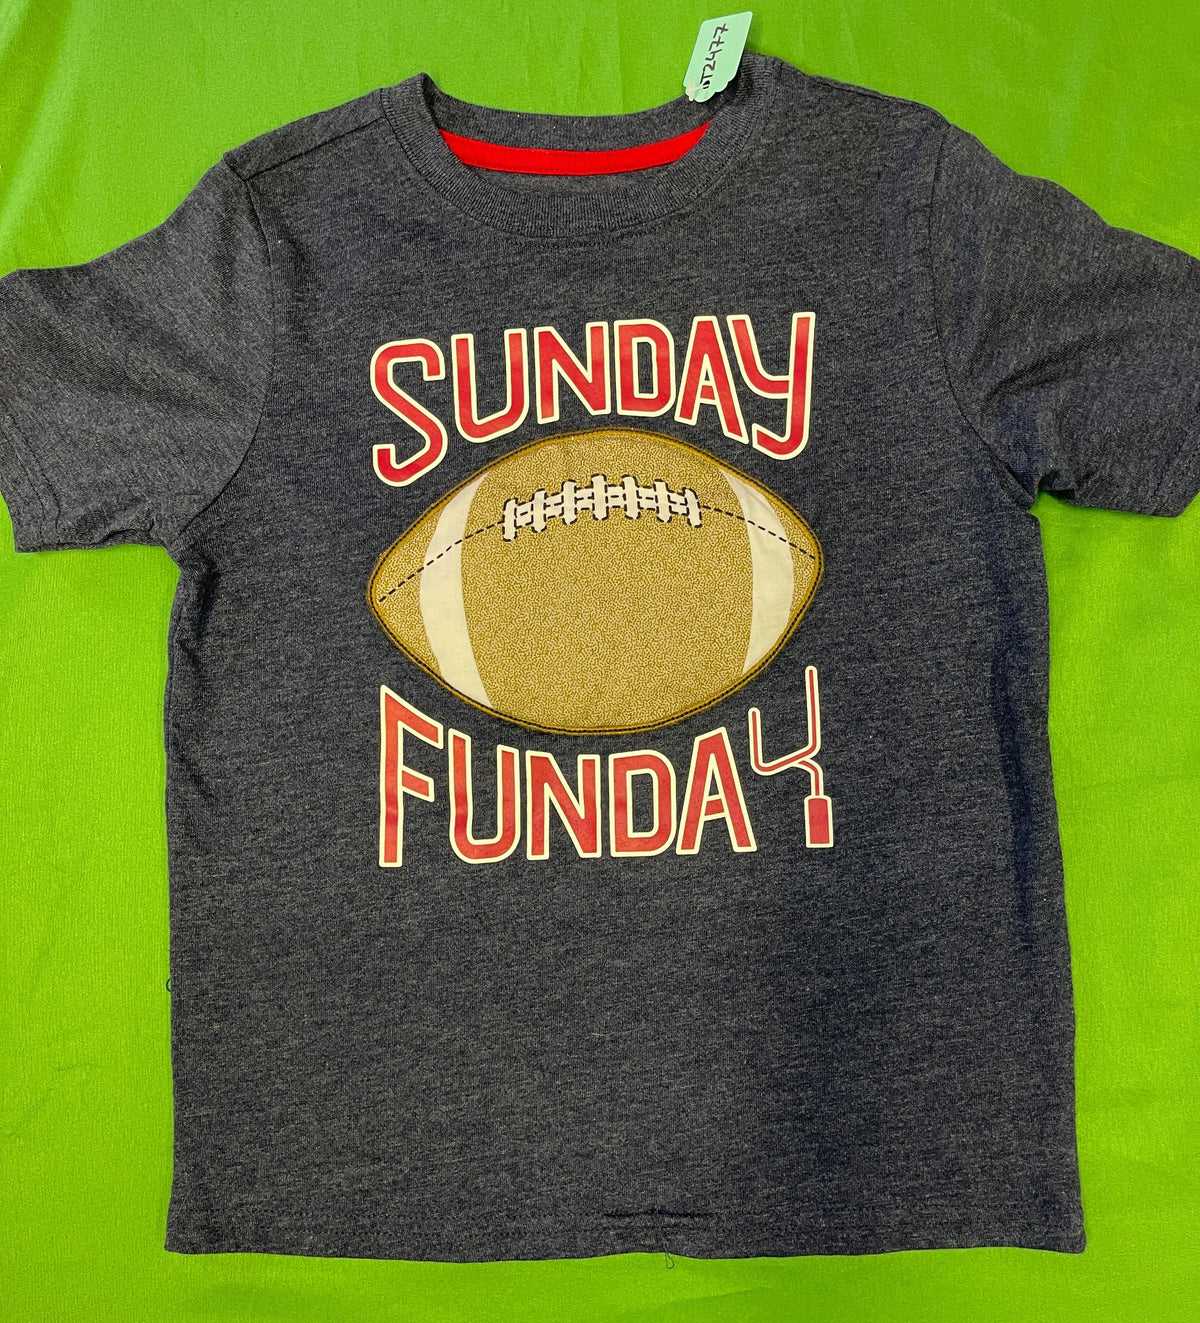 American Football "Sunday Funday" 3D T-Shirt Youth X-Small 5T